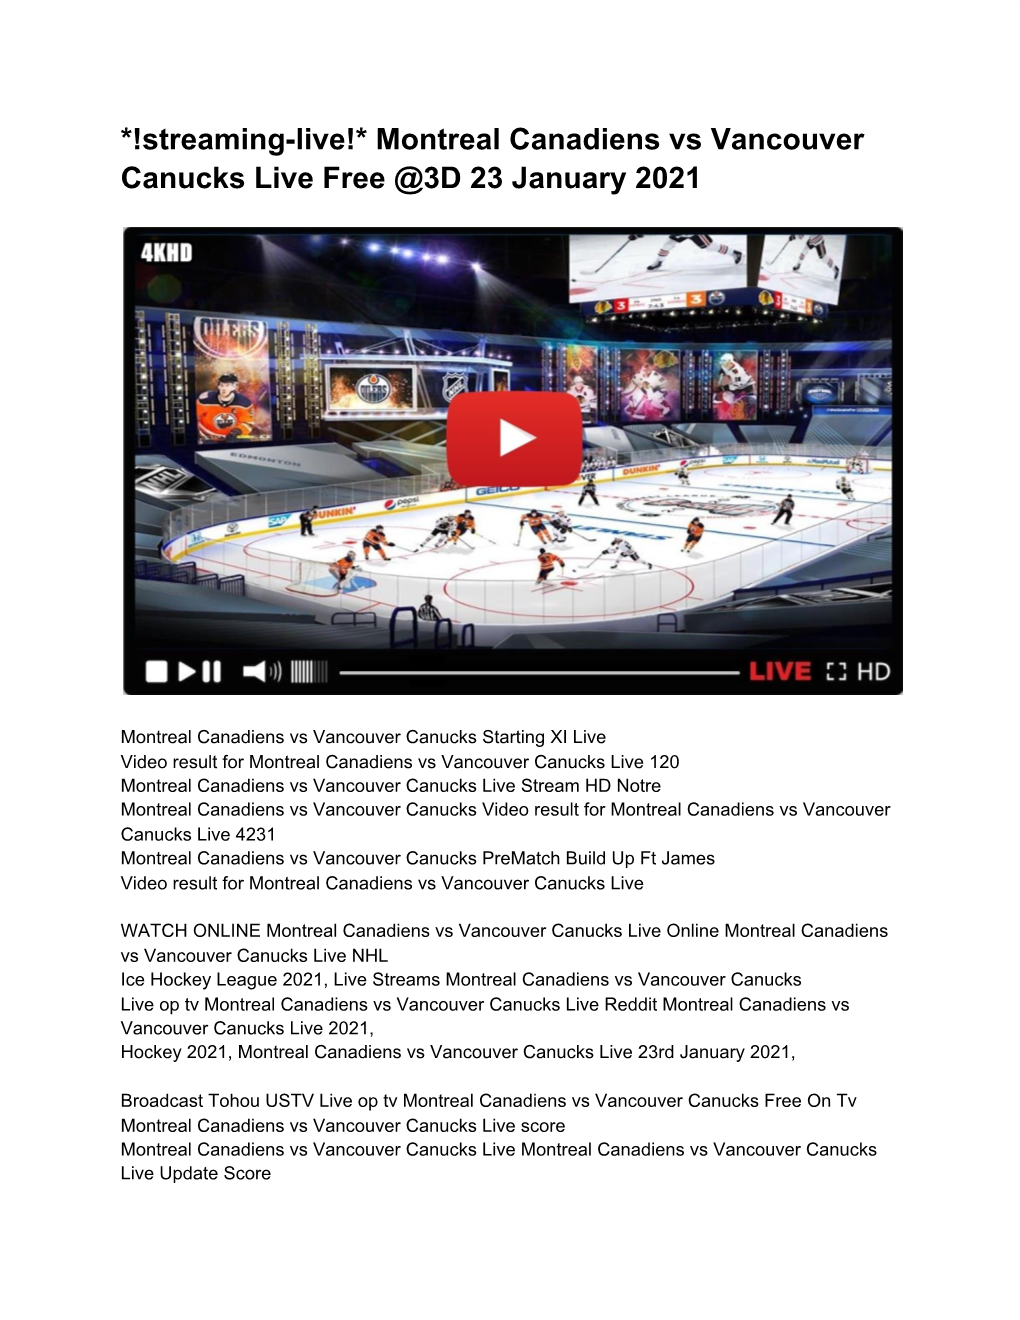 Montreal Canadiens Vs Vancouver Canucks Live Free @3D 23 January 2021